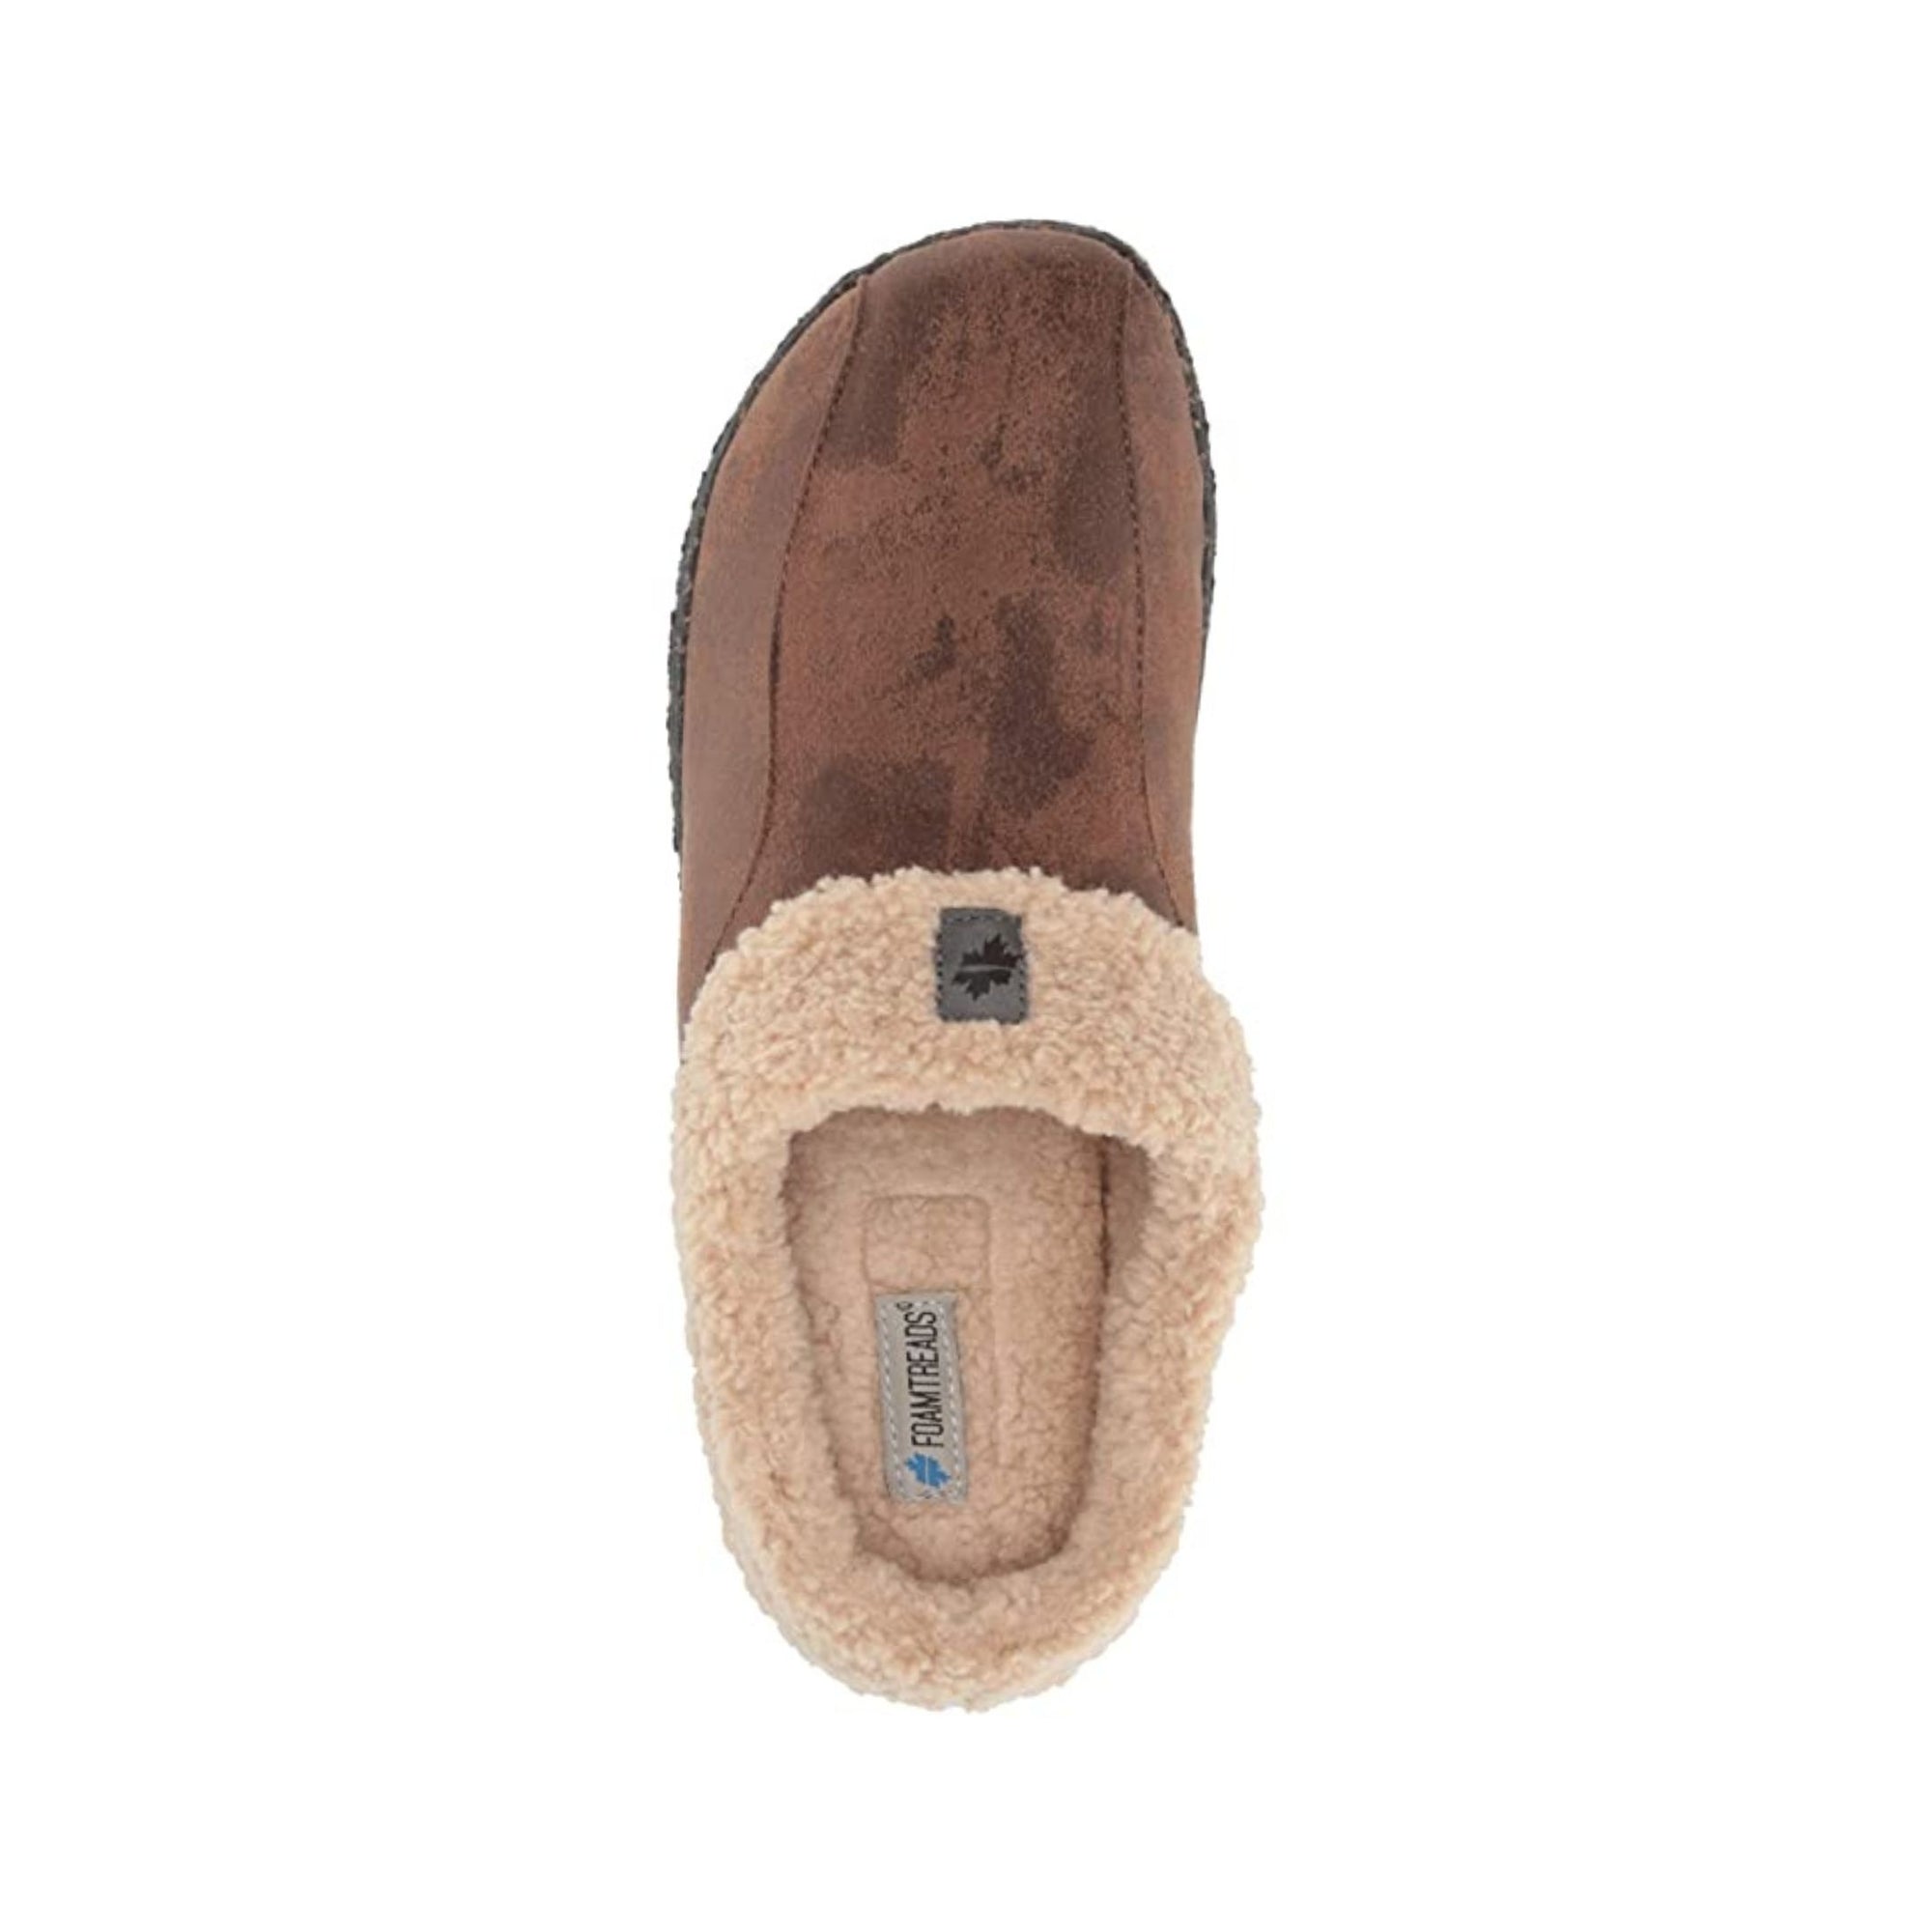 Top view of the Lucas 2 Slipper in brown. Lining is beige with Foamtreads logo on the footbed. 